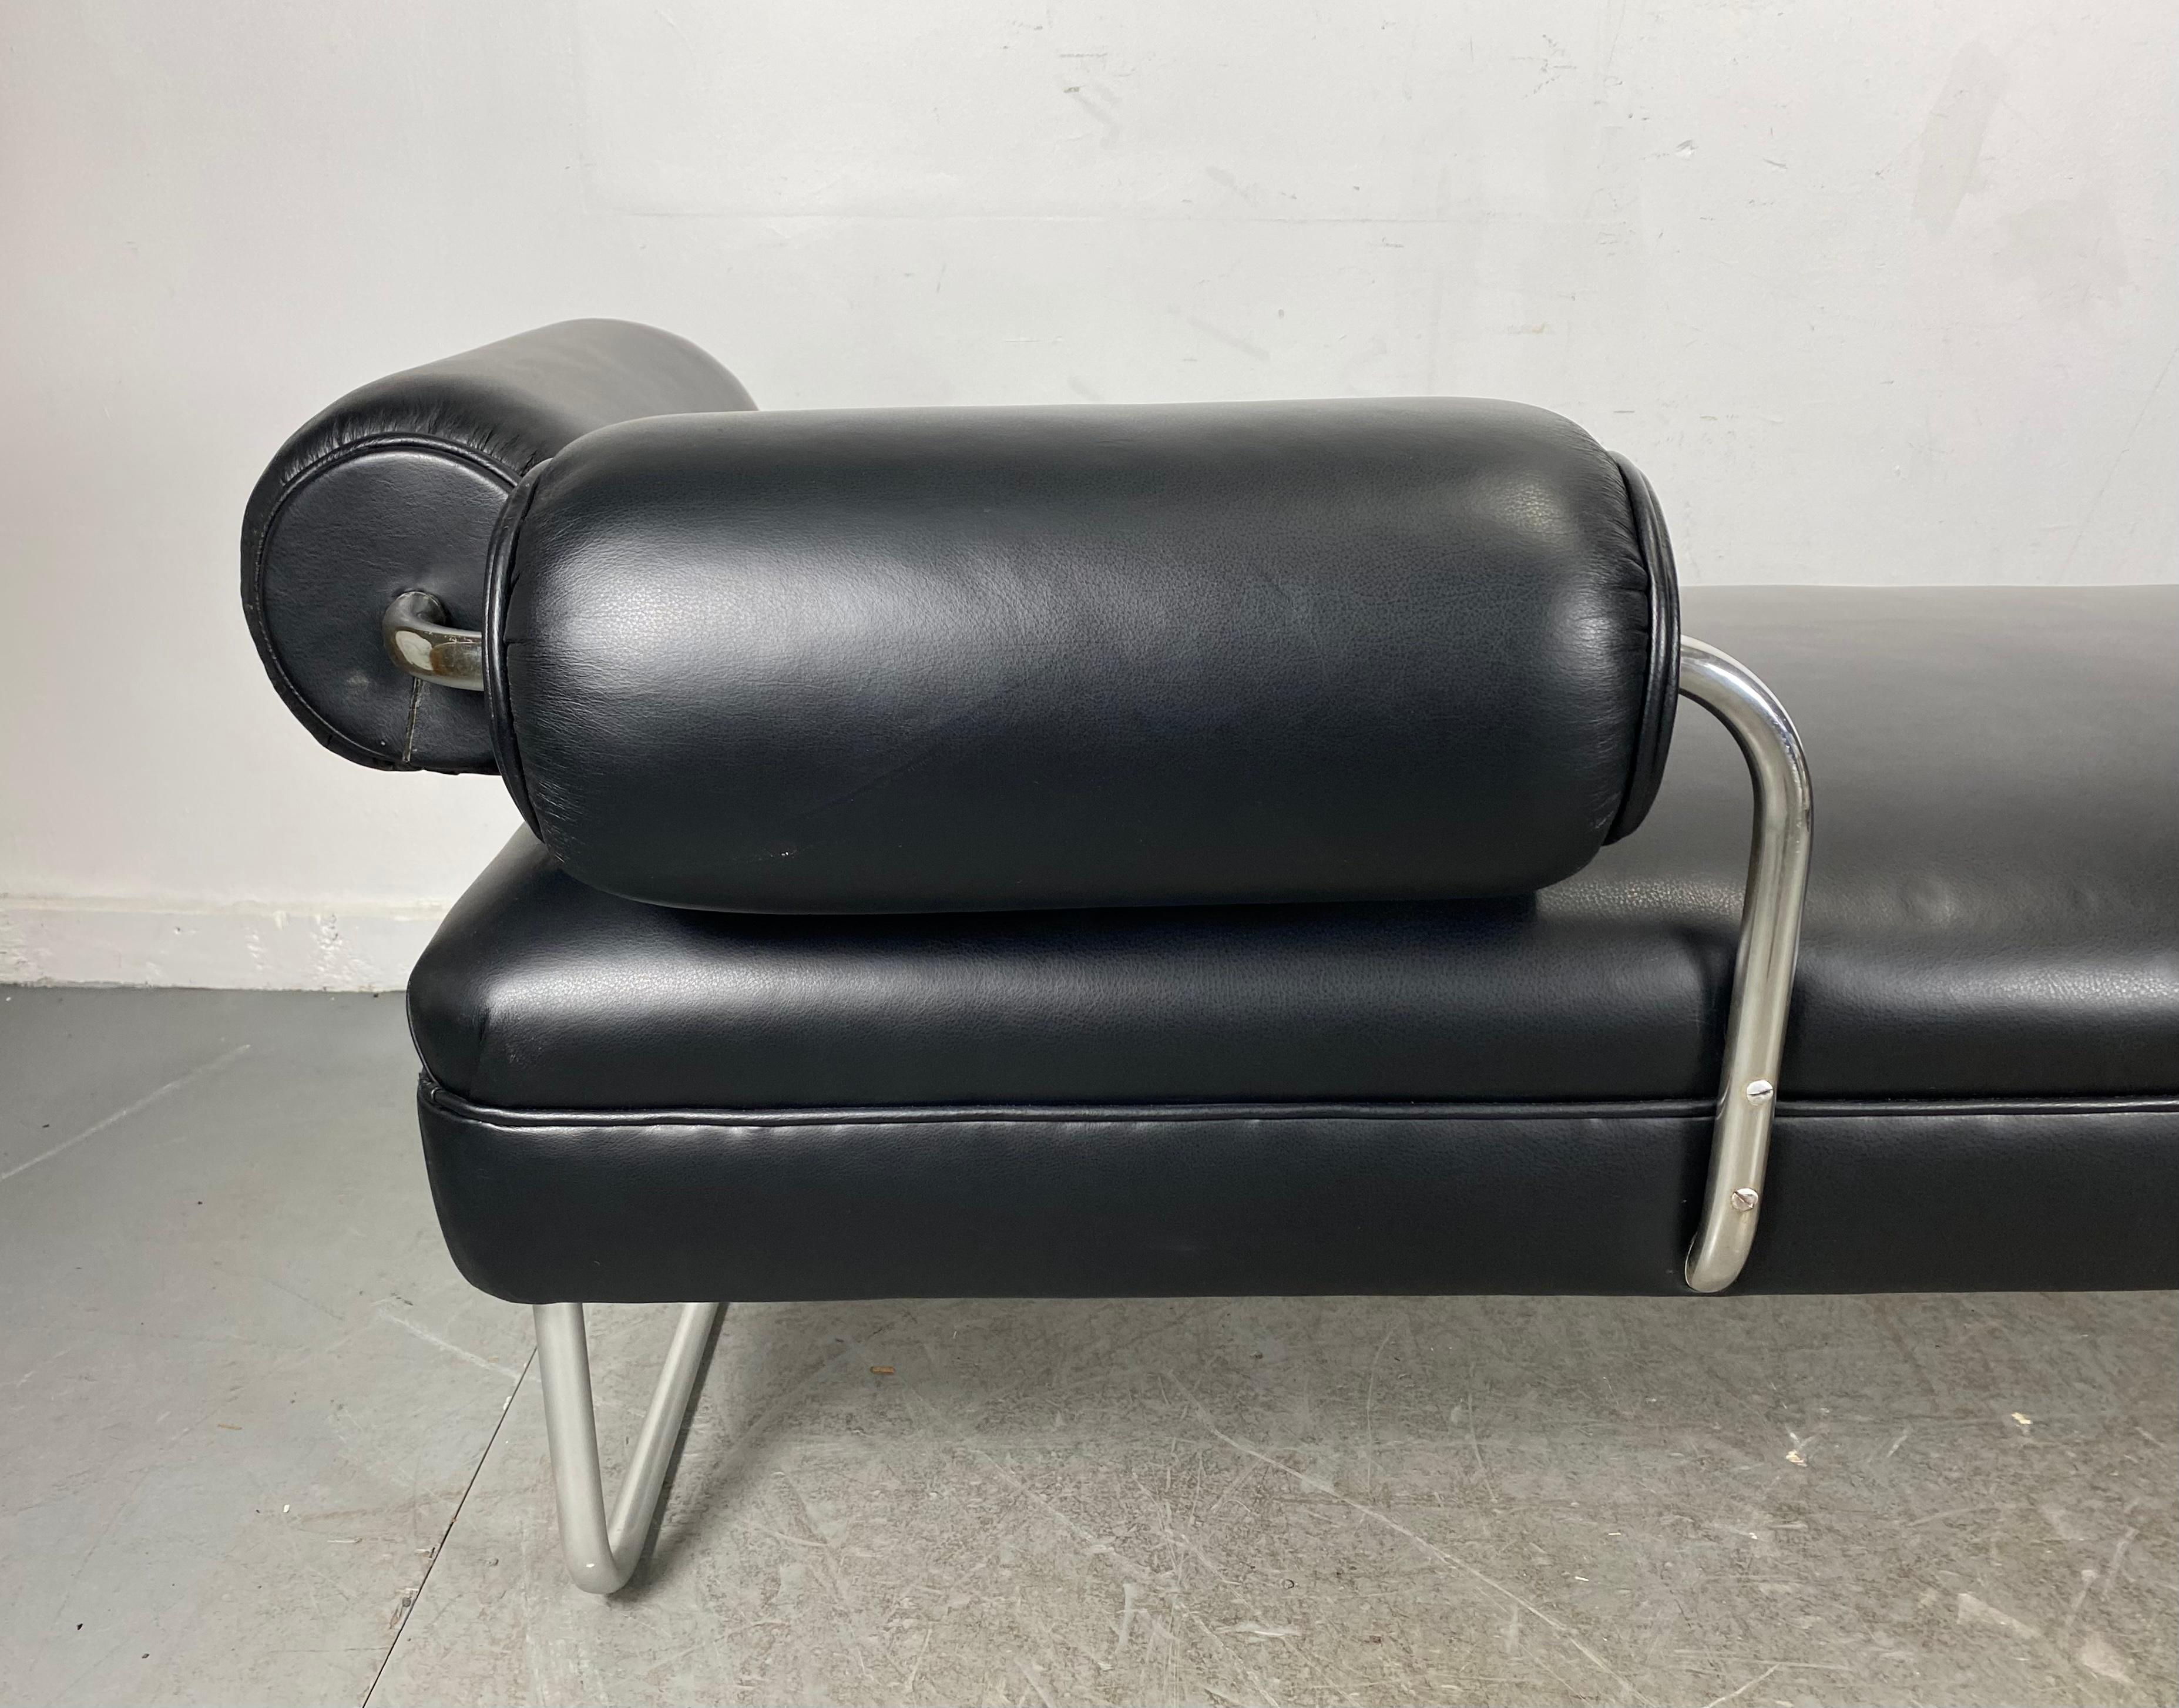 Most Unusual Tubular chrome and Leather Bauhaus chaise lounge / daybed, amazing design, two large attached Bolster Pillows (arm and back rest). Extremely comfortable, totally restored, wonderful soft black leather, Hand delivery avail to New York